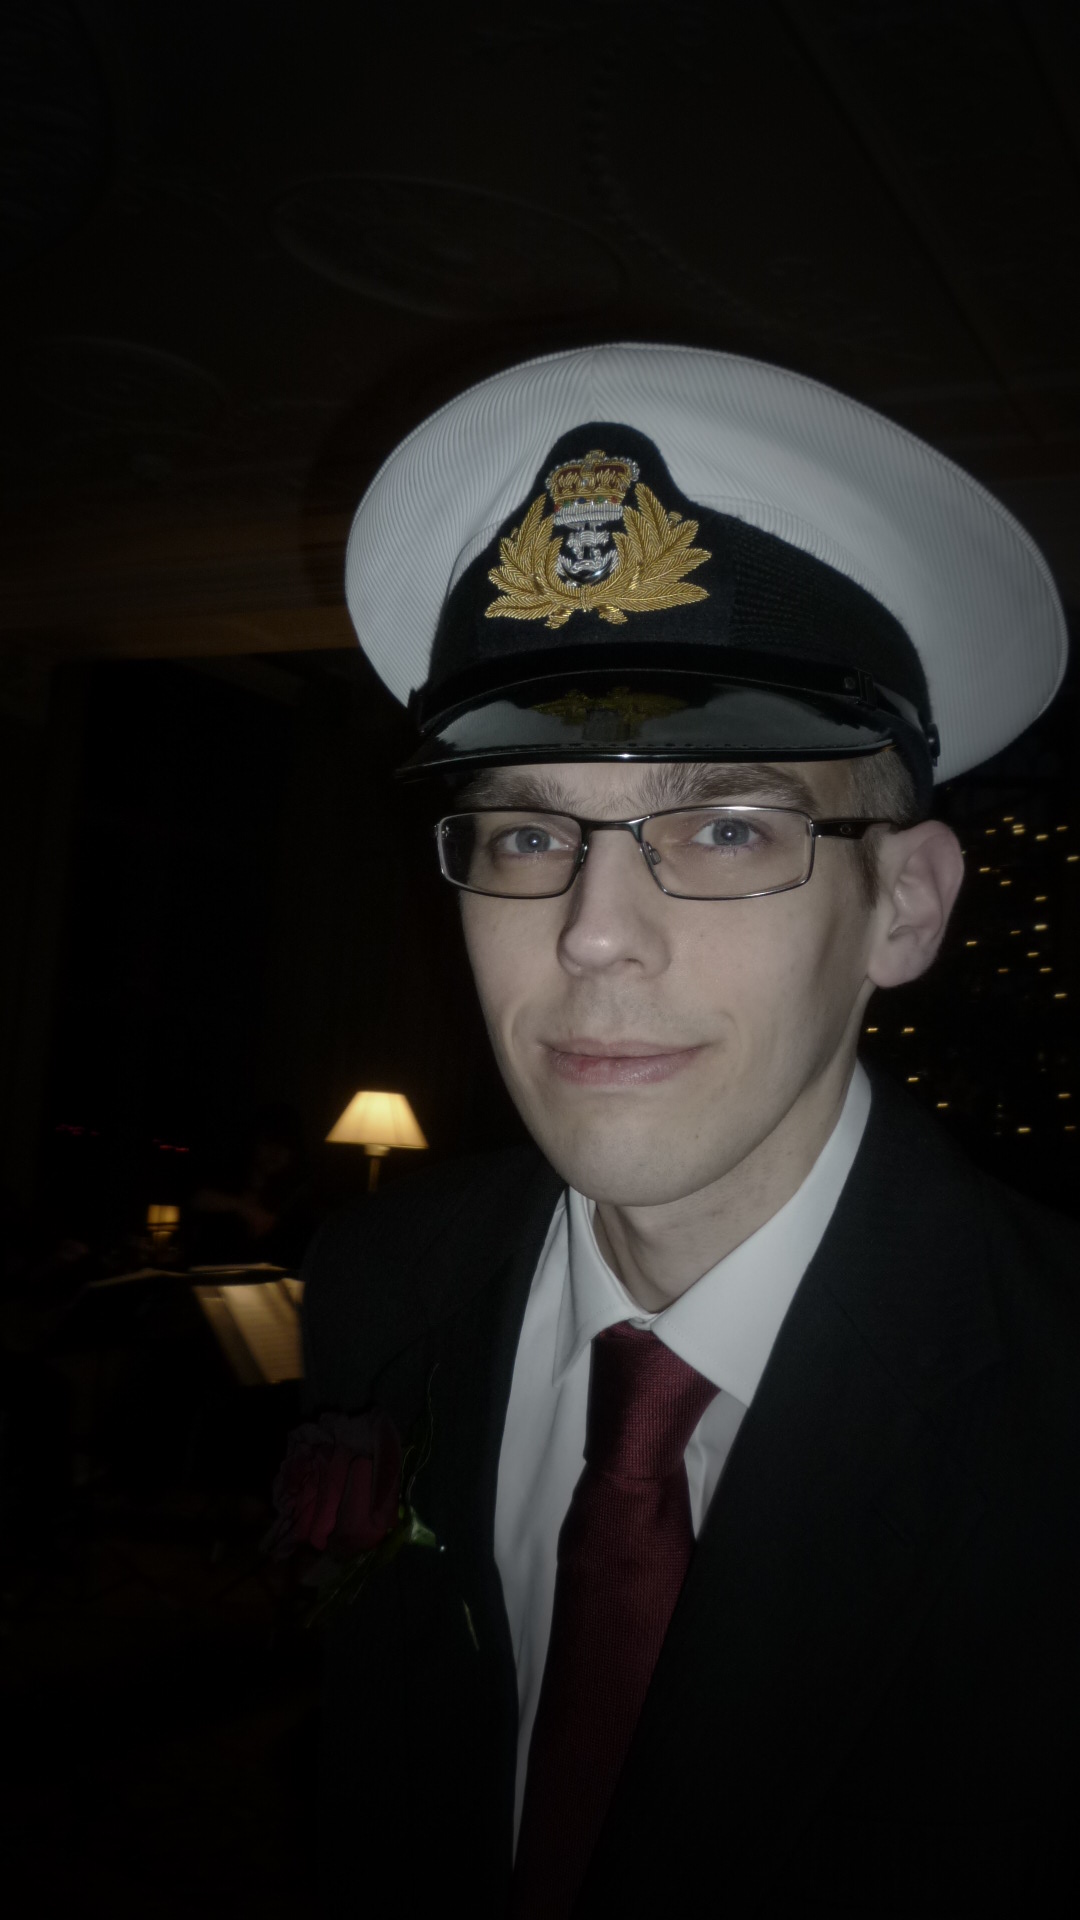 a man with glasses, a suit and a cap